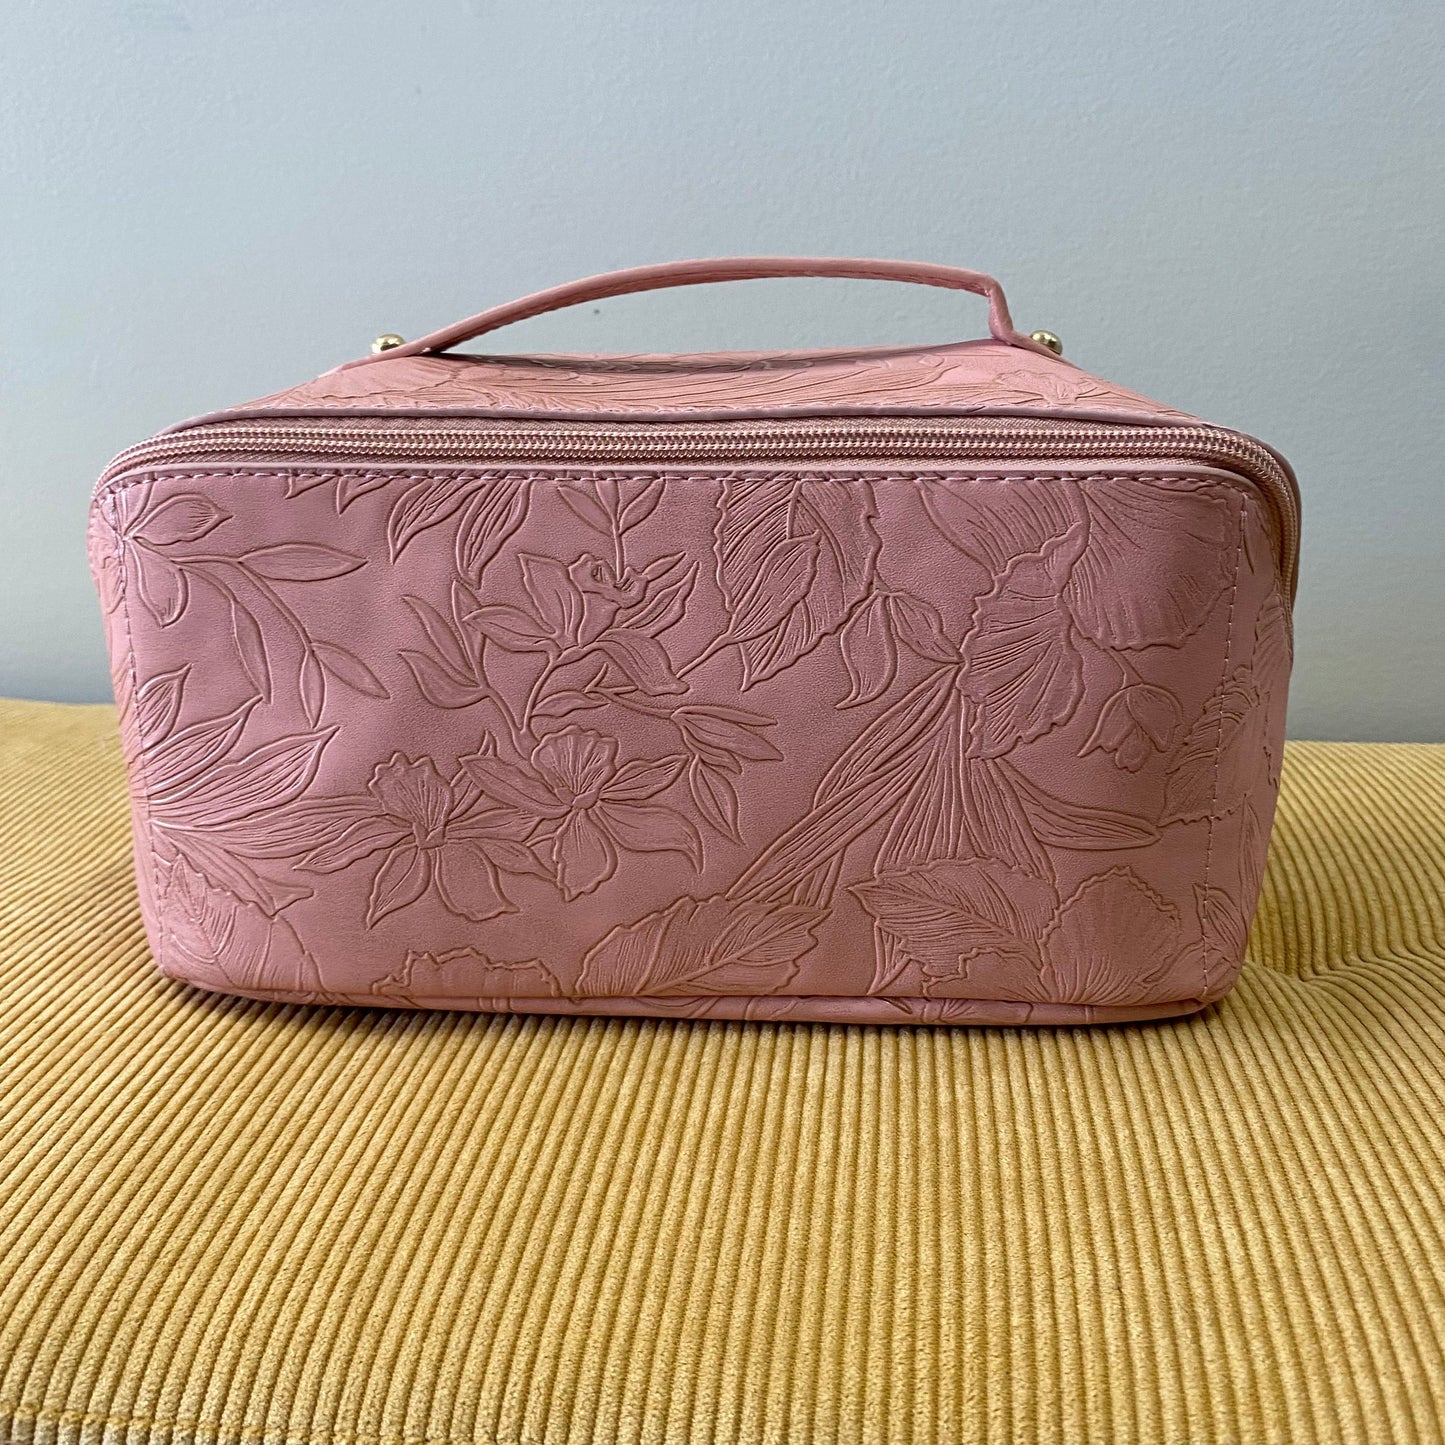 Oversized Lay Flat Cosmetic Bag - Embossed Floral